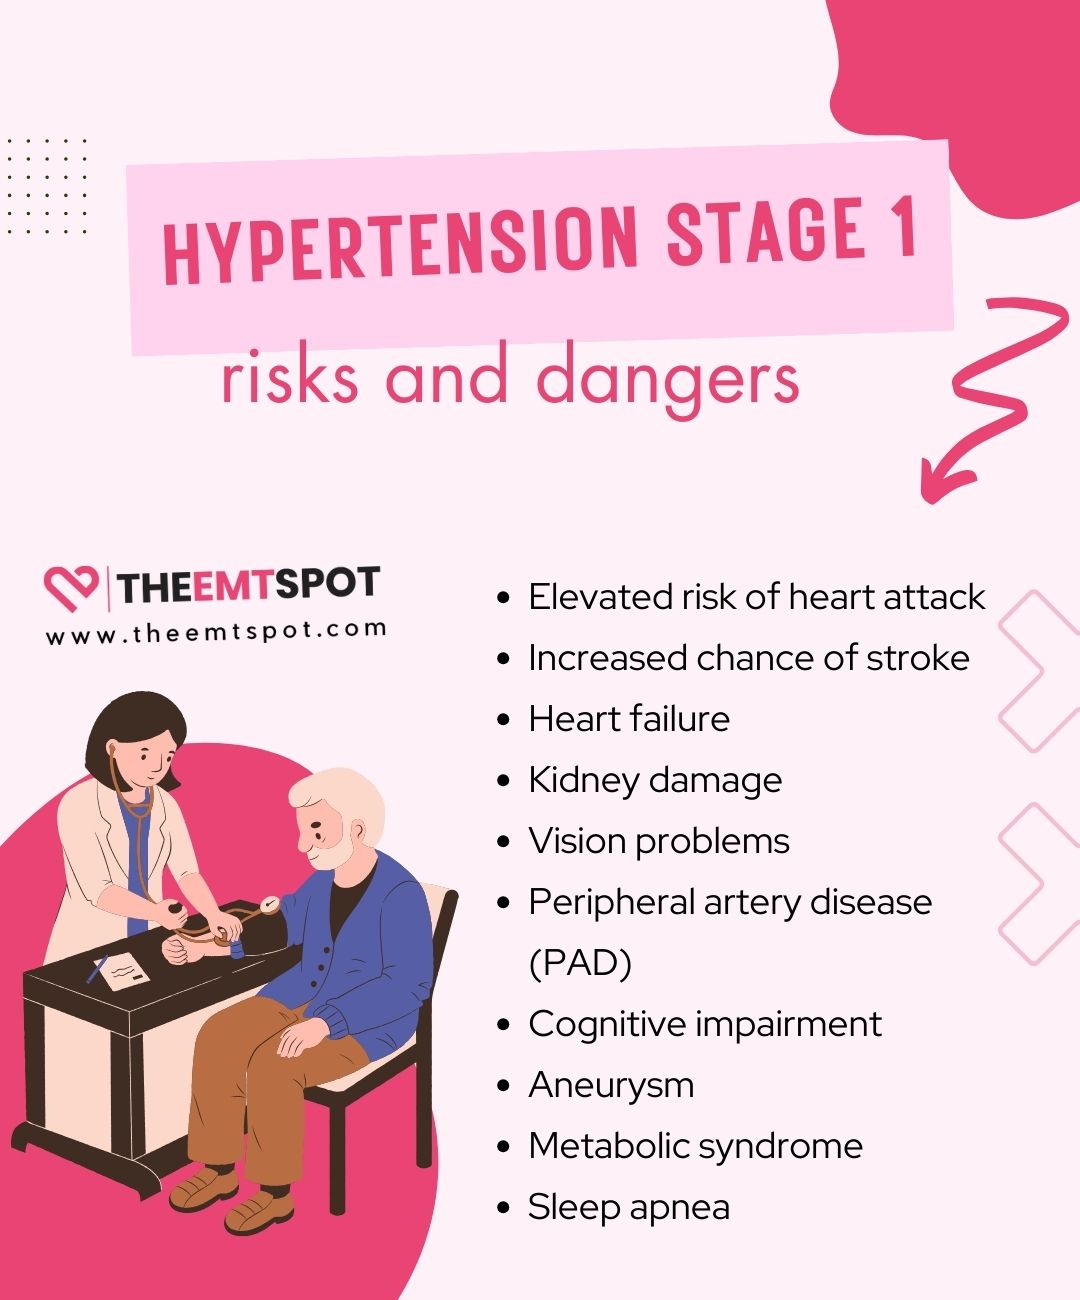 hypertension stage 1 risks and dangers